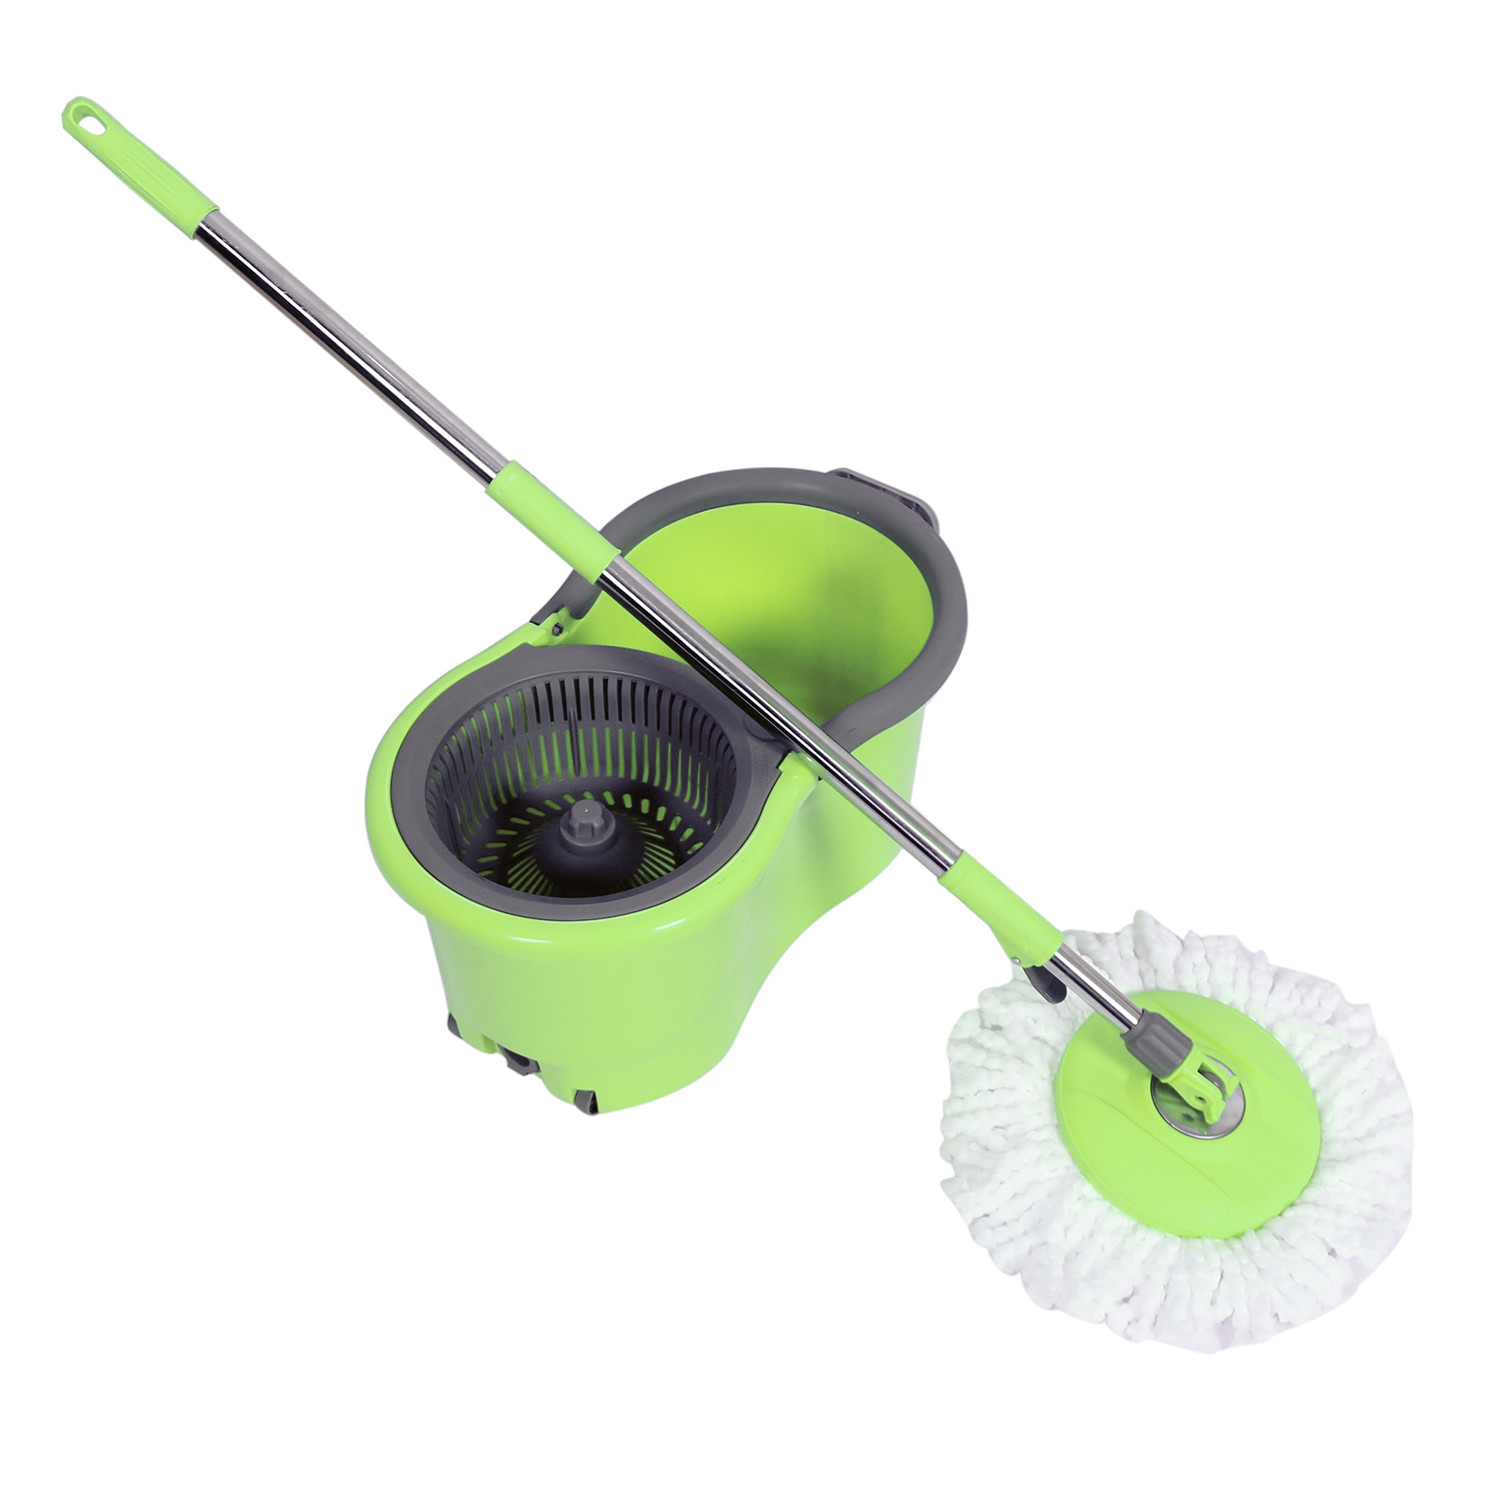 Kuber Industries Plastic Adjustable Mopping Set & 2 Microfiber Head Refill With Wheels Bucket And Auto Fold Handle For Floor Cleaning (Green)